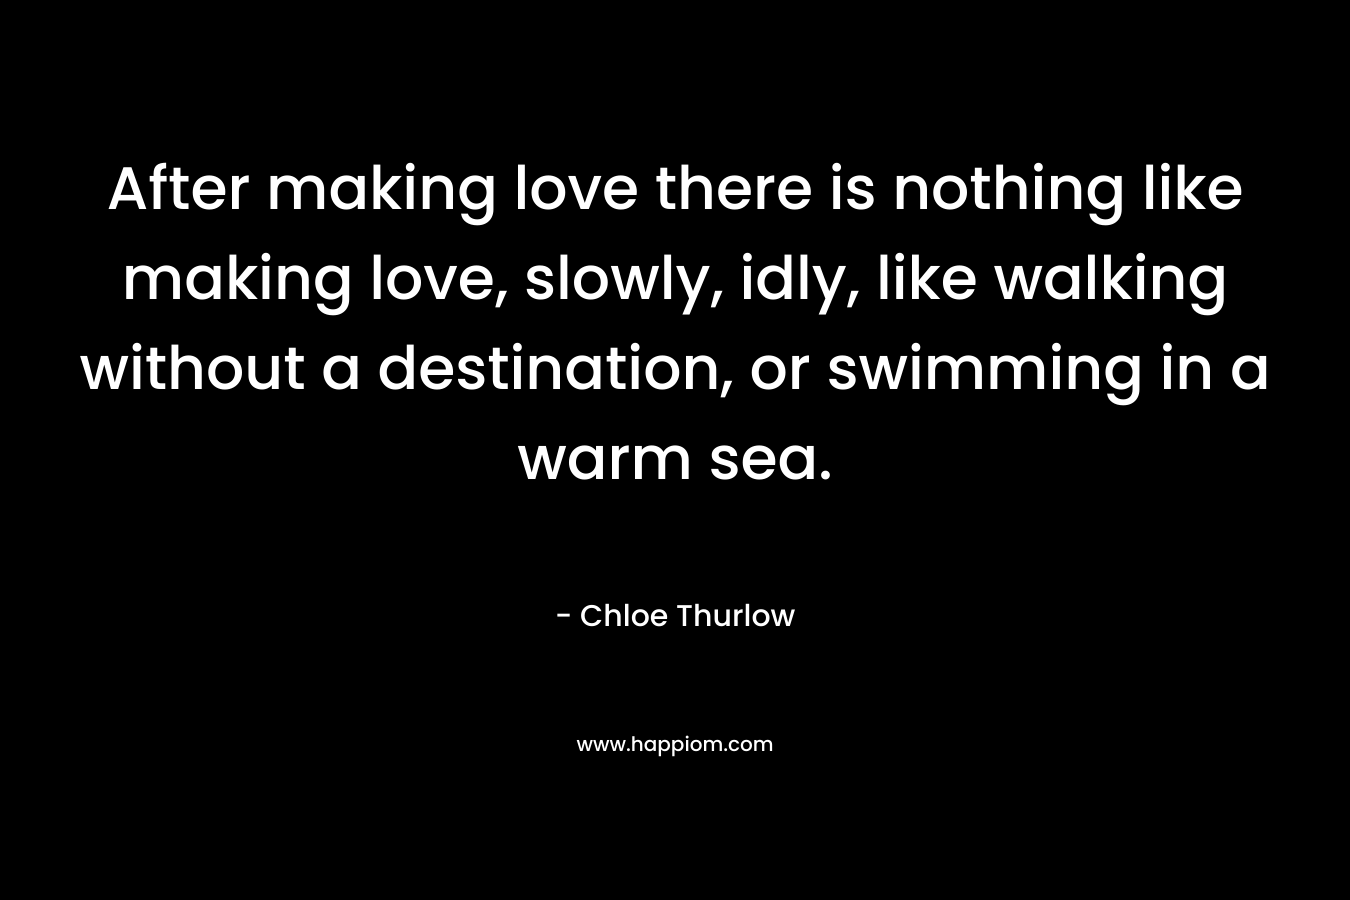 After making love there is nothing like making love, slowly, idly, like walking without a destination, or swimming in a warm sea.